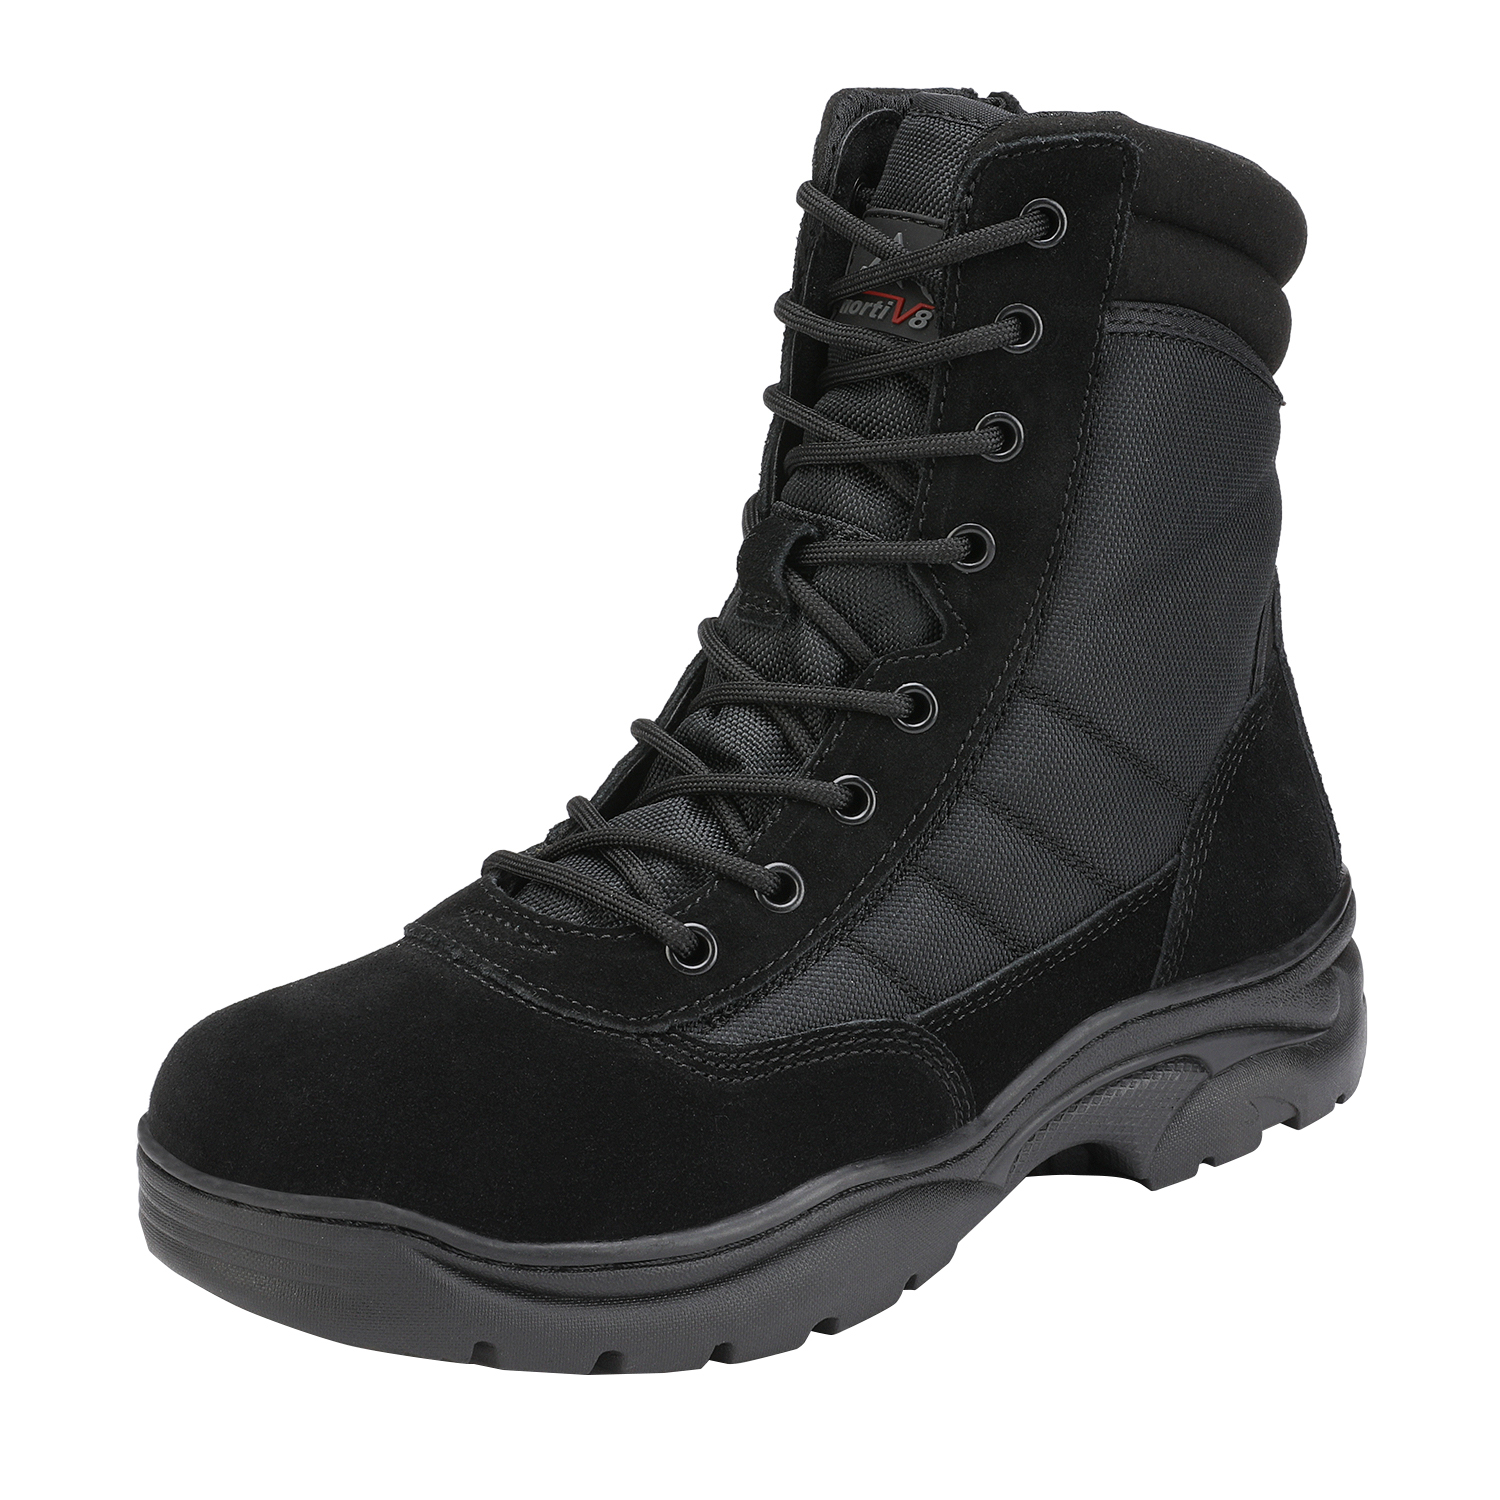 Nortiv 8 Men's Tactical Work Boots Zip Military Leather Motorcycle Combat Boots for Man Trooper Black/Suede Size 8.5 - image 1 of 6